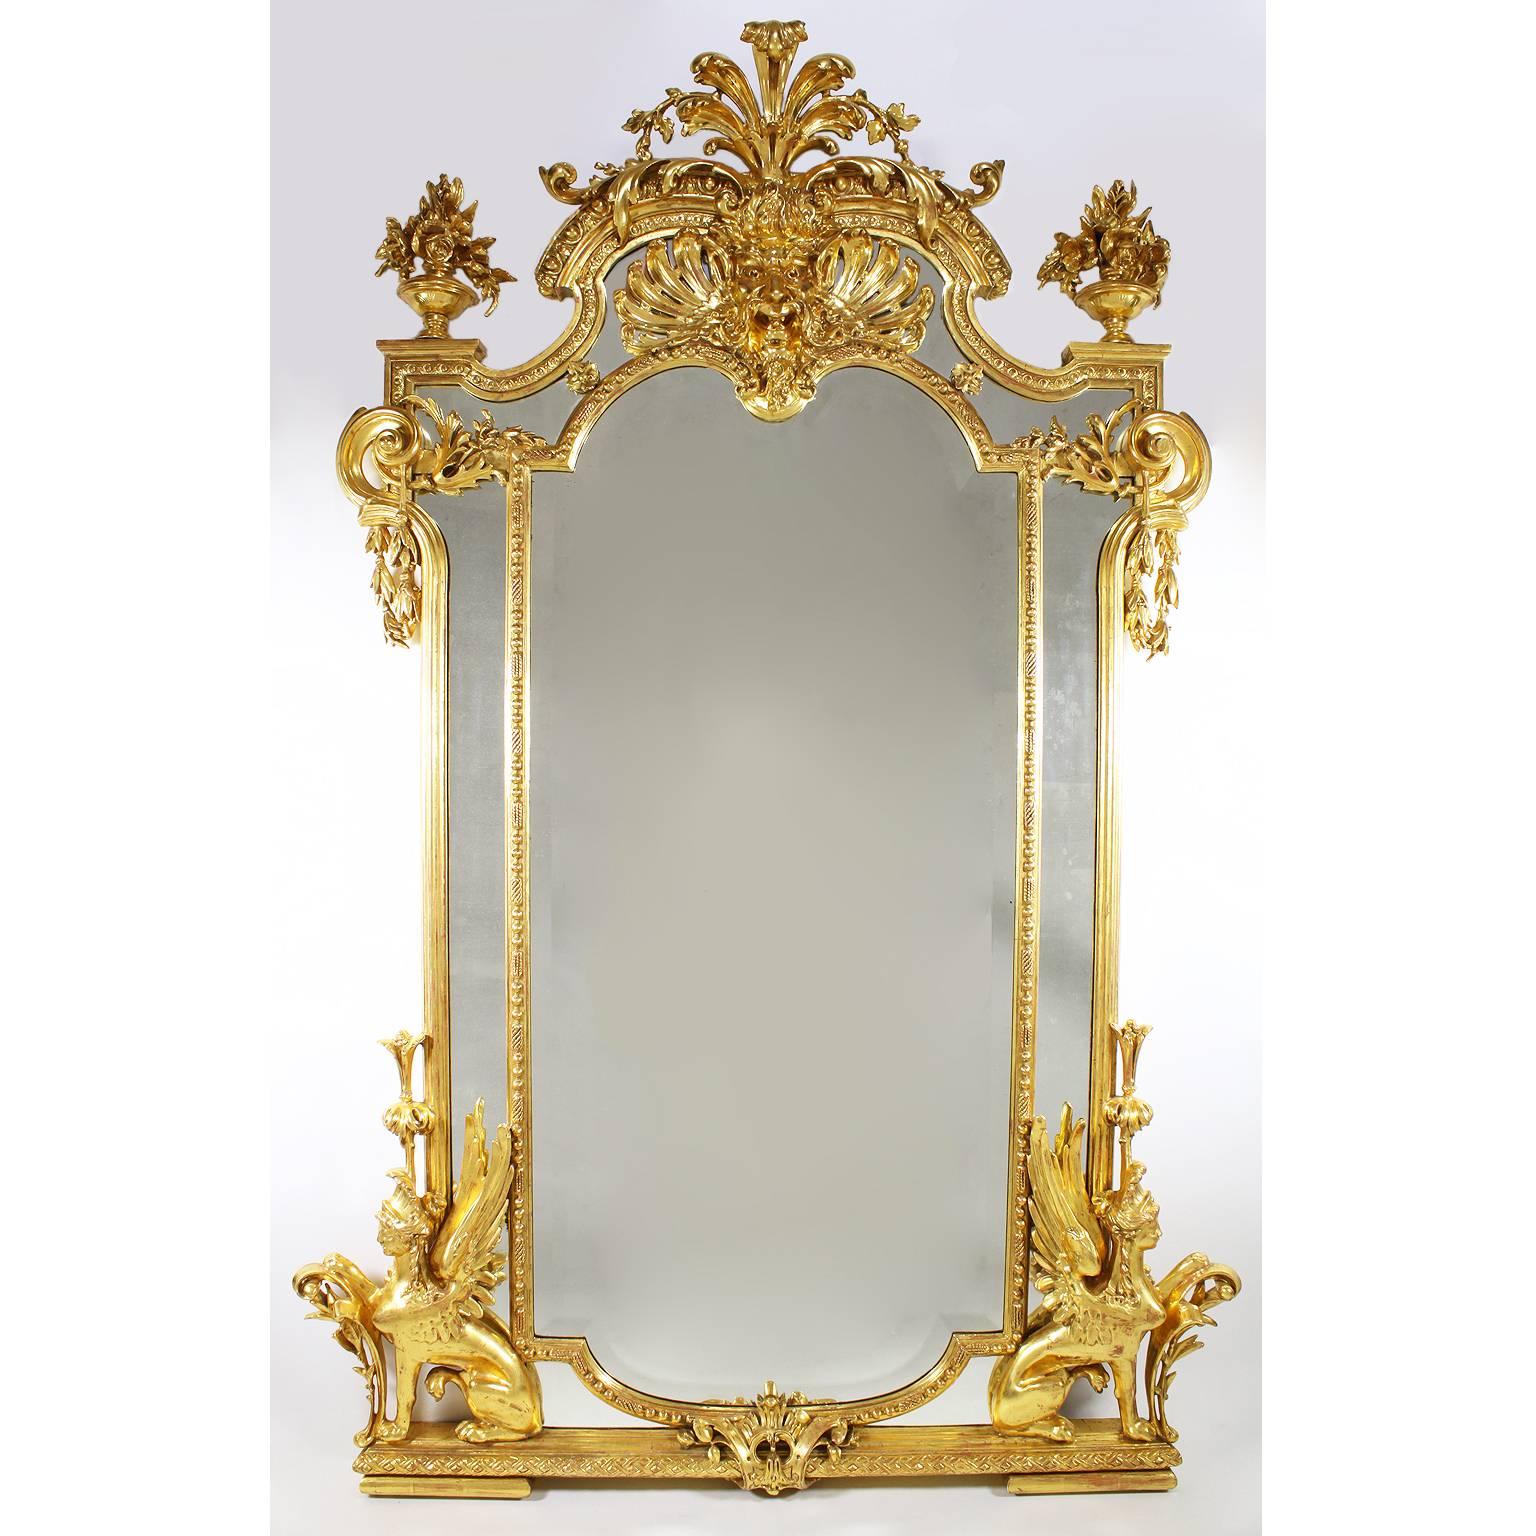 A fine French Empire Revival 19th century giltwood and Gesso carved figural console table with matching mirror. The 